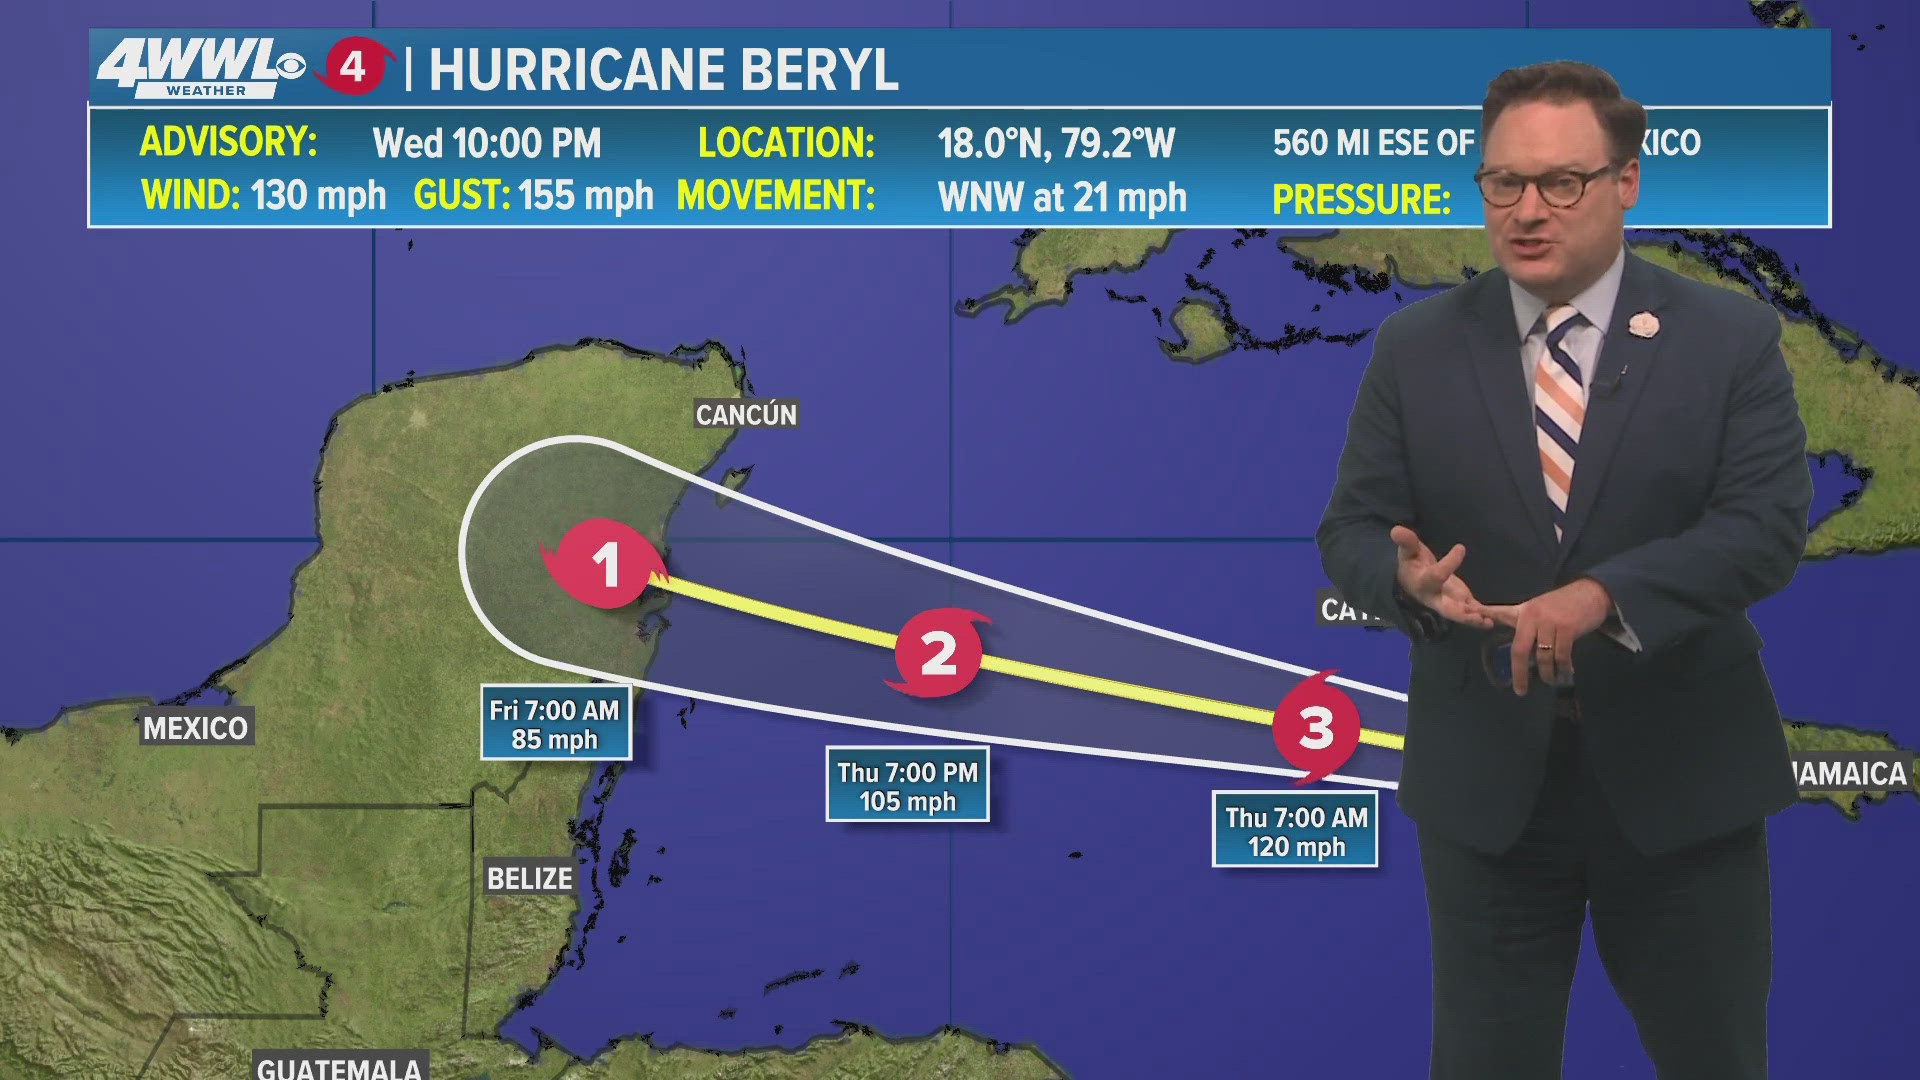 Chief meteorologist Chris Franklin says Winds have come down a bit to 130 mph, but Hurricane Beryl is still a Category 4.